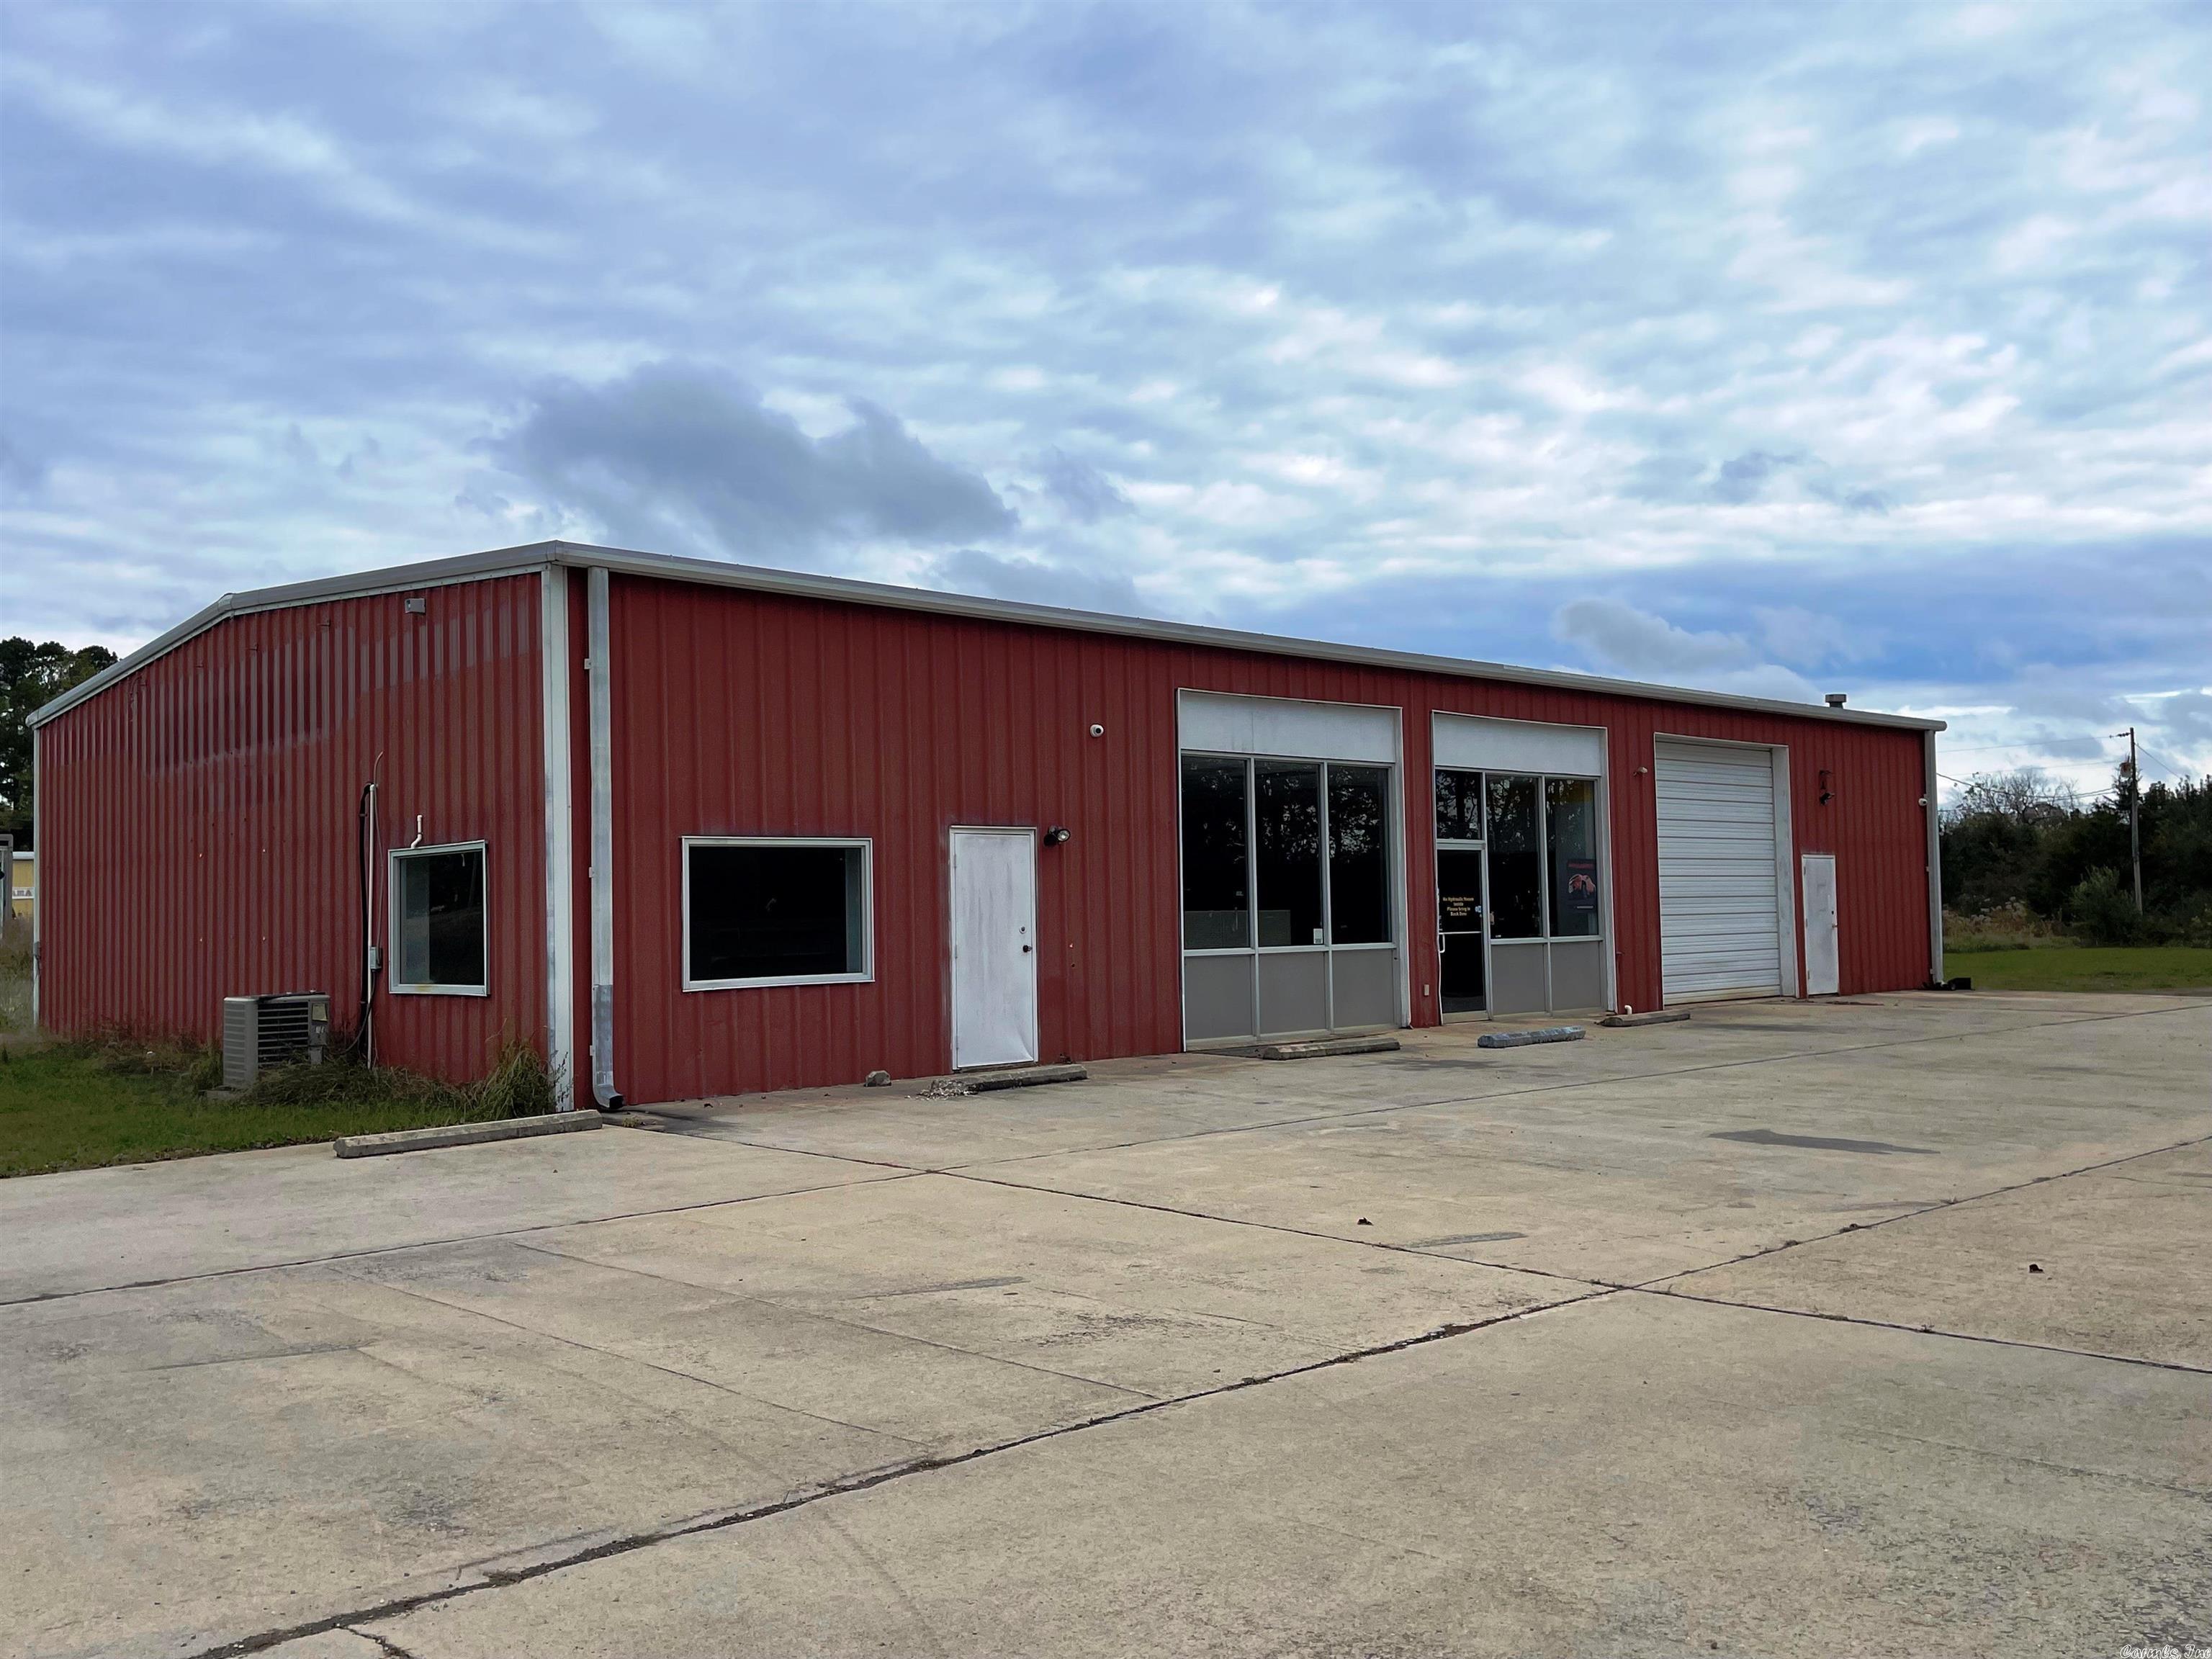 Commercial / Industrial for sale – 218  Hwy 62 W   Ash Flat, AR